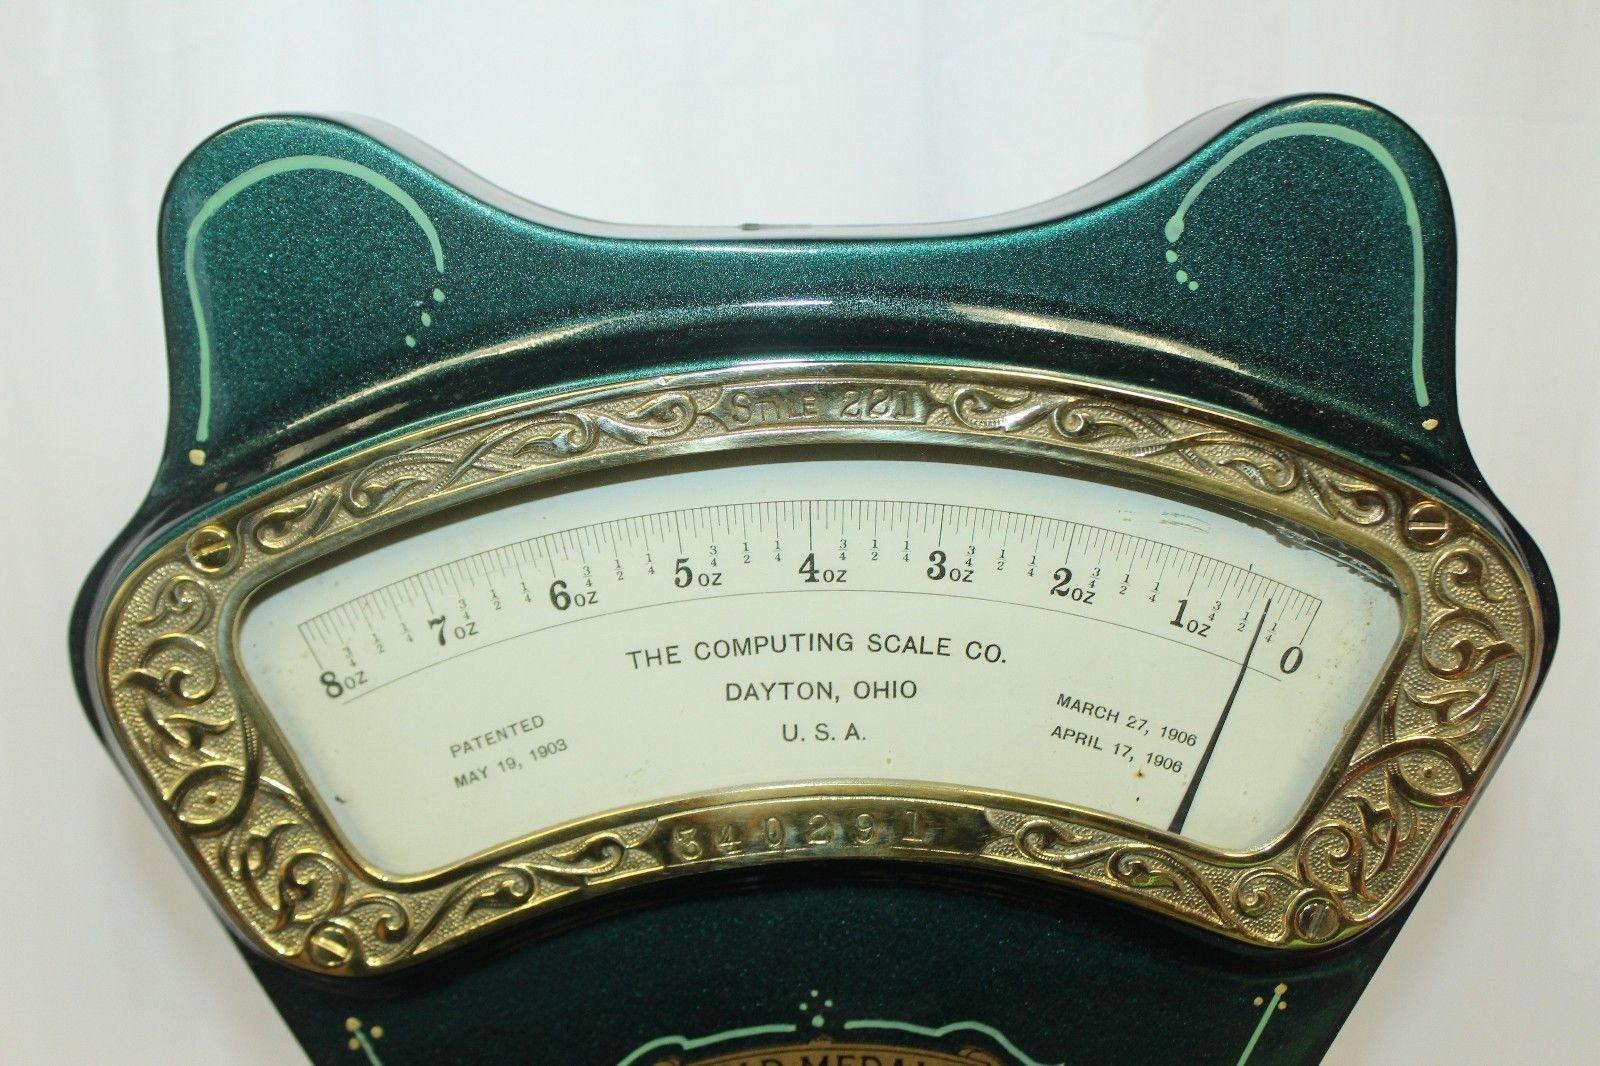 Early 1900s Dayton 8oz Computing Scale Co. Style 221 In Good Condition For Sale In Orange, CA